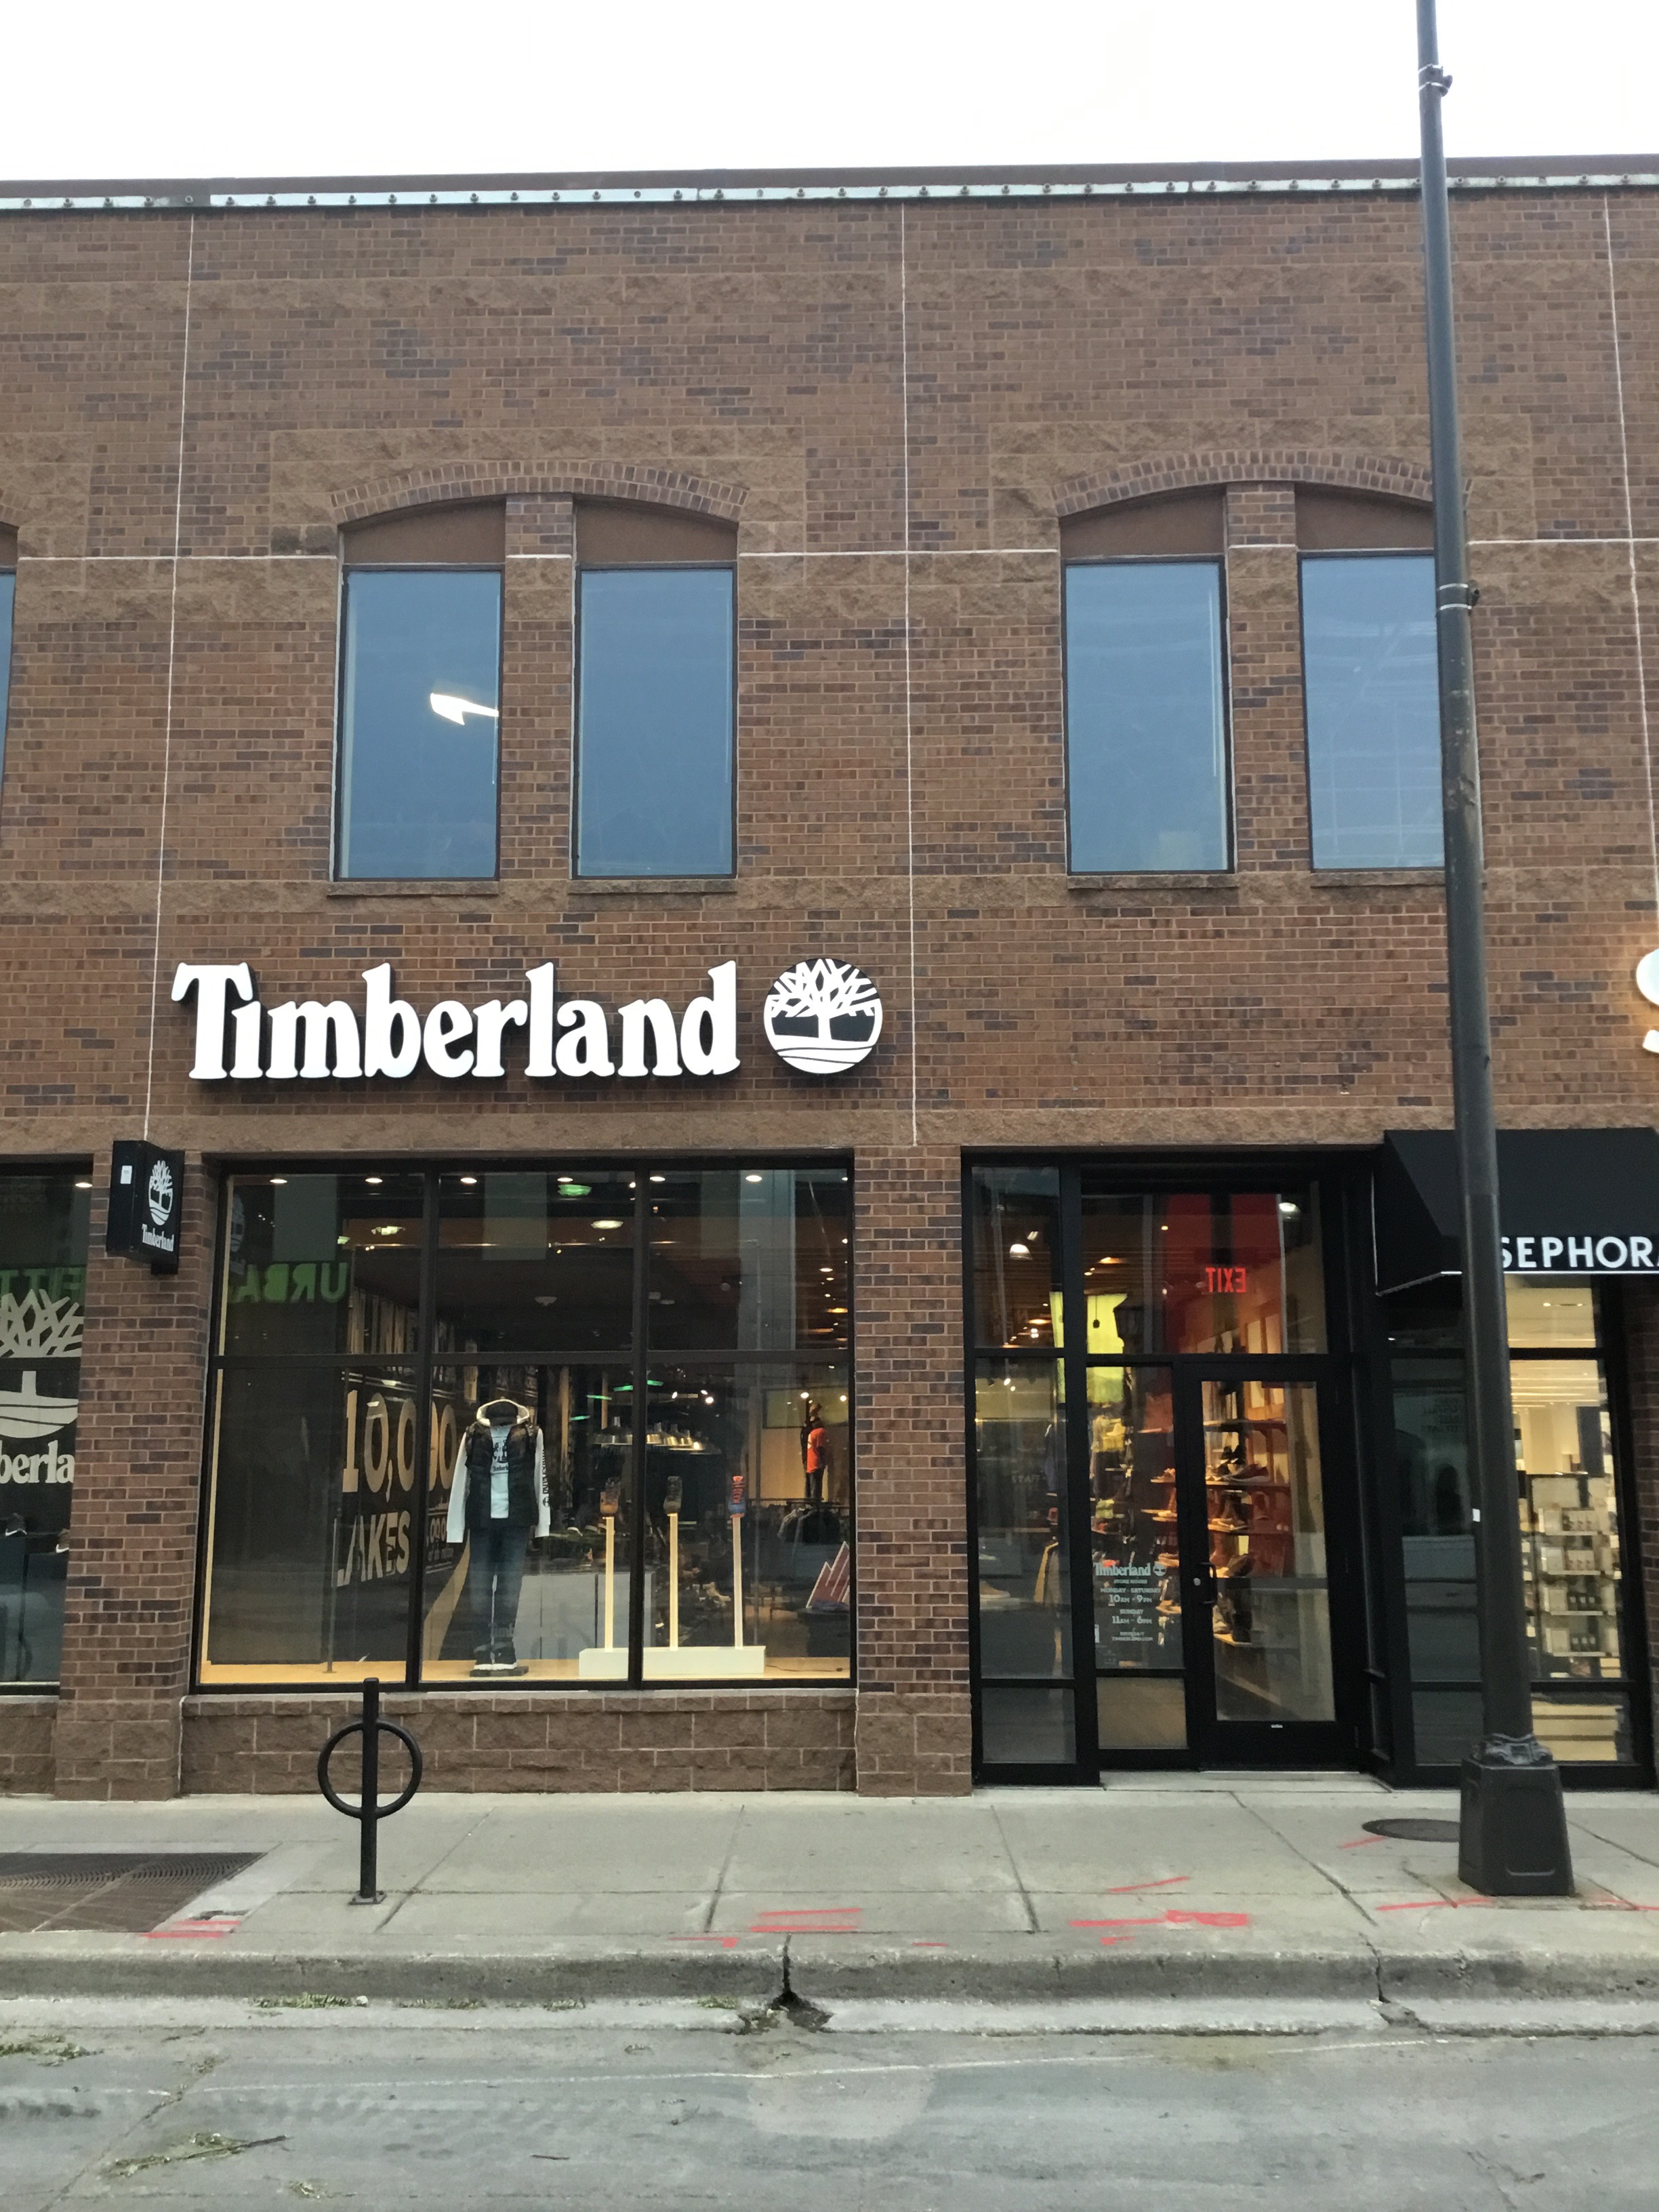 Timberland - Boots, Shoes, Clothing & Accessories in ...